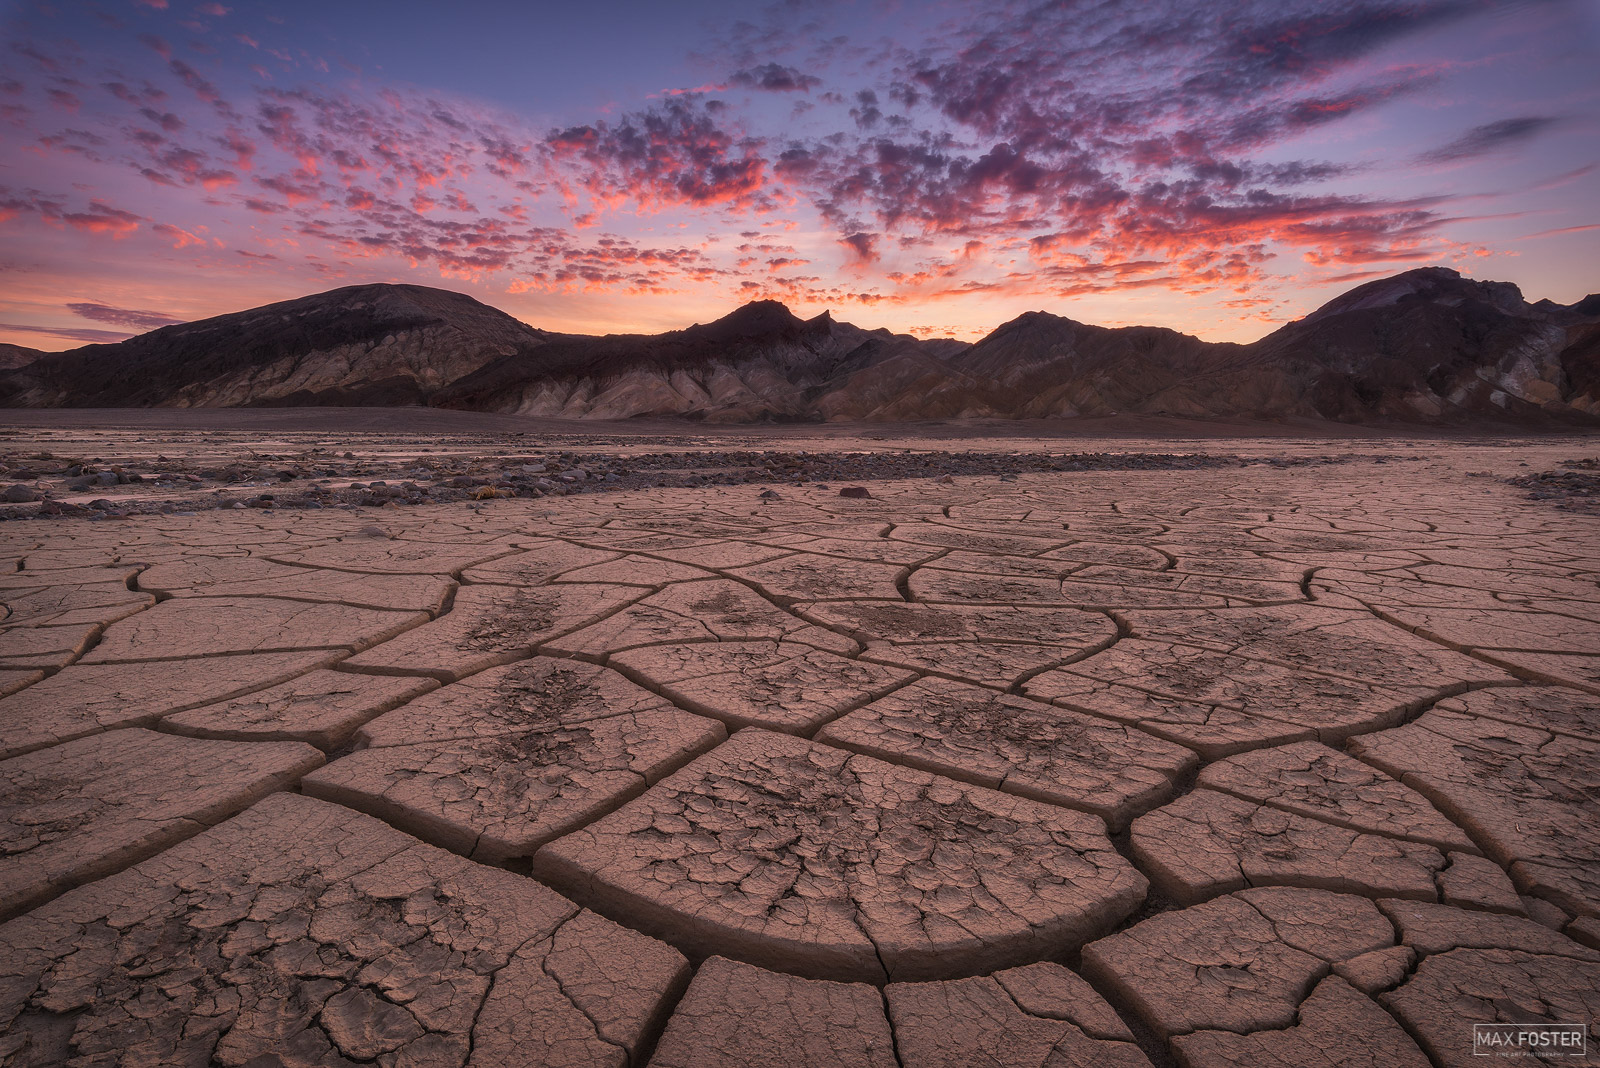 Bring nature into your home with Desert Daybreak, Max Foster's limited edition photography print of mud cracks in Death Valley...